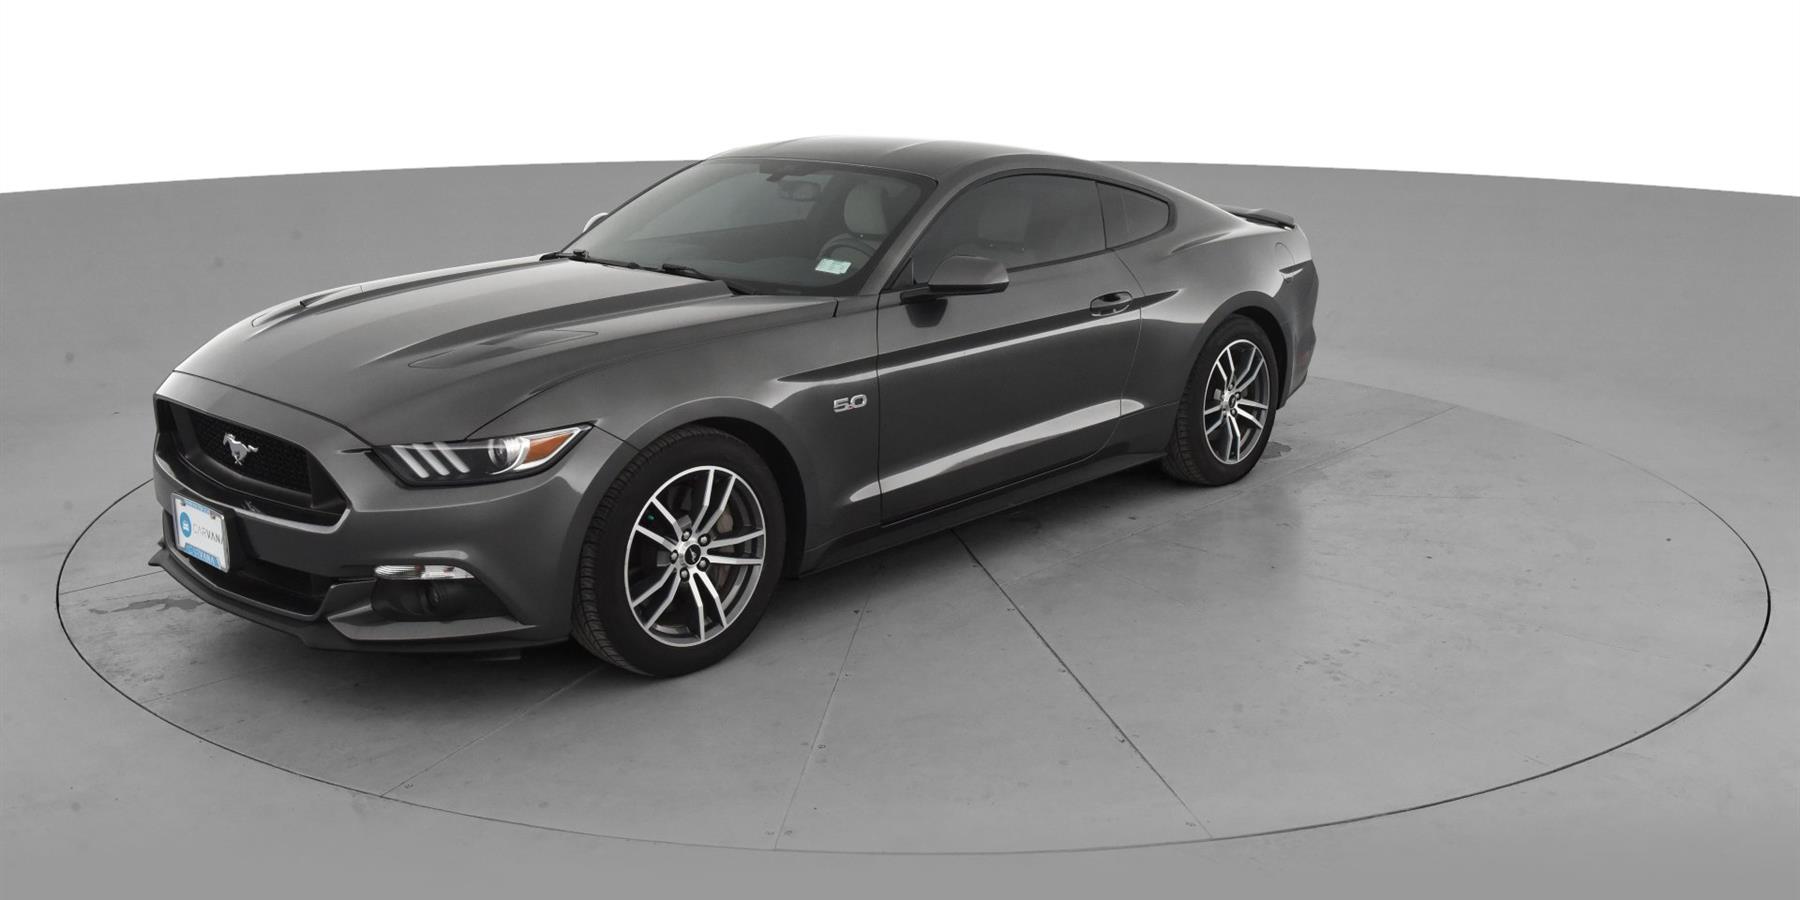 2015 Ford Mustang Gt Coupe 2d For Sale Carvana